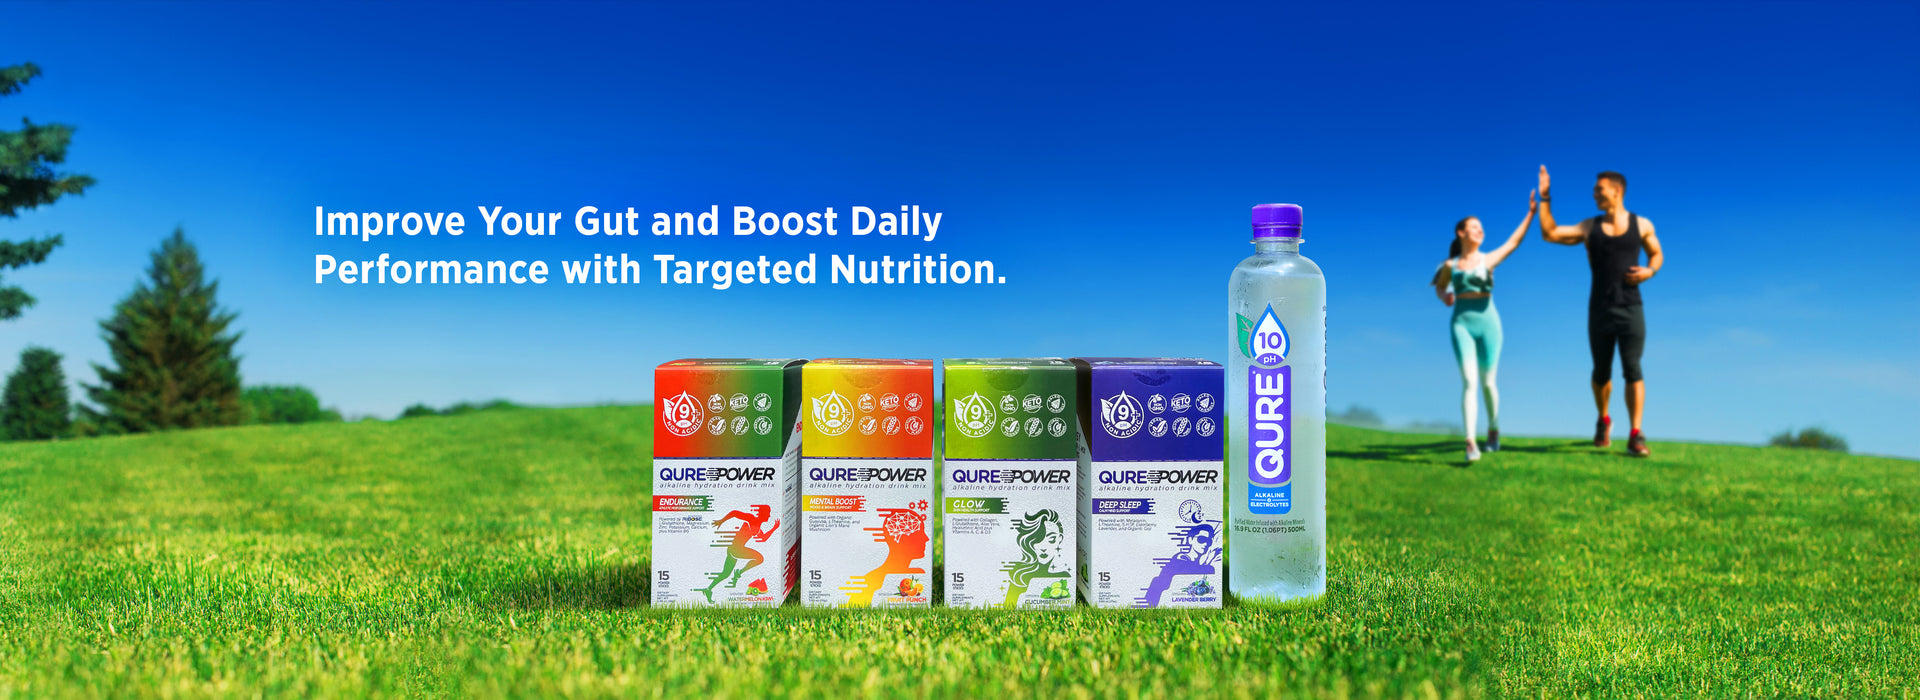  Improve Your Gut and Boost Daily Performance with Targeted Nutrition